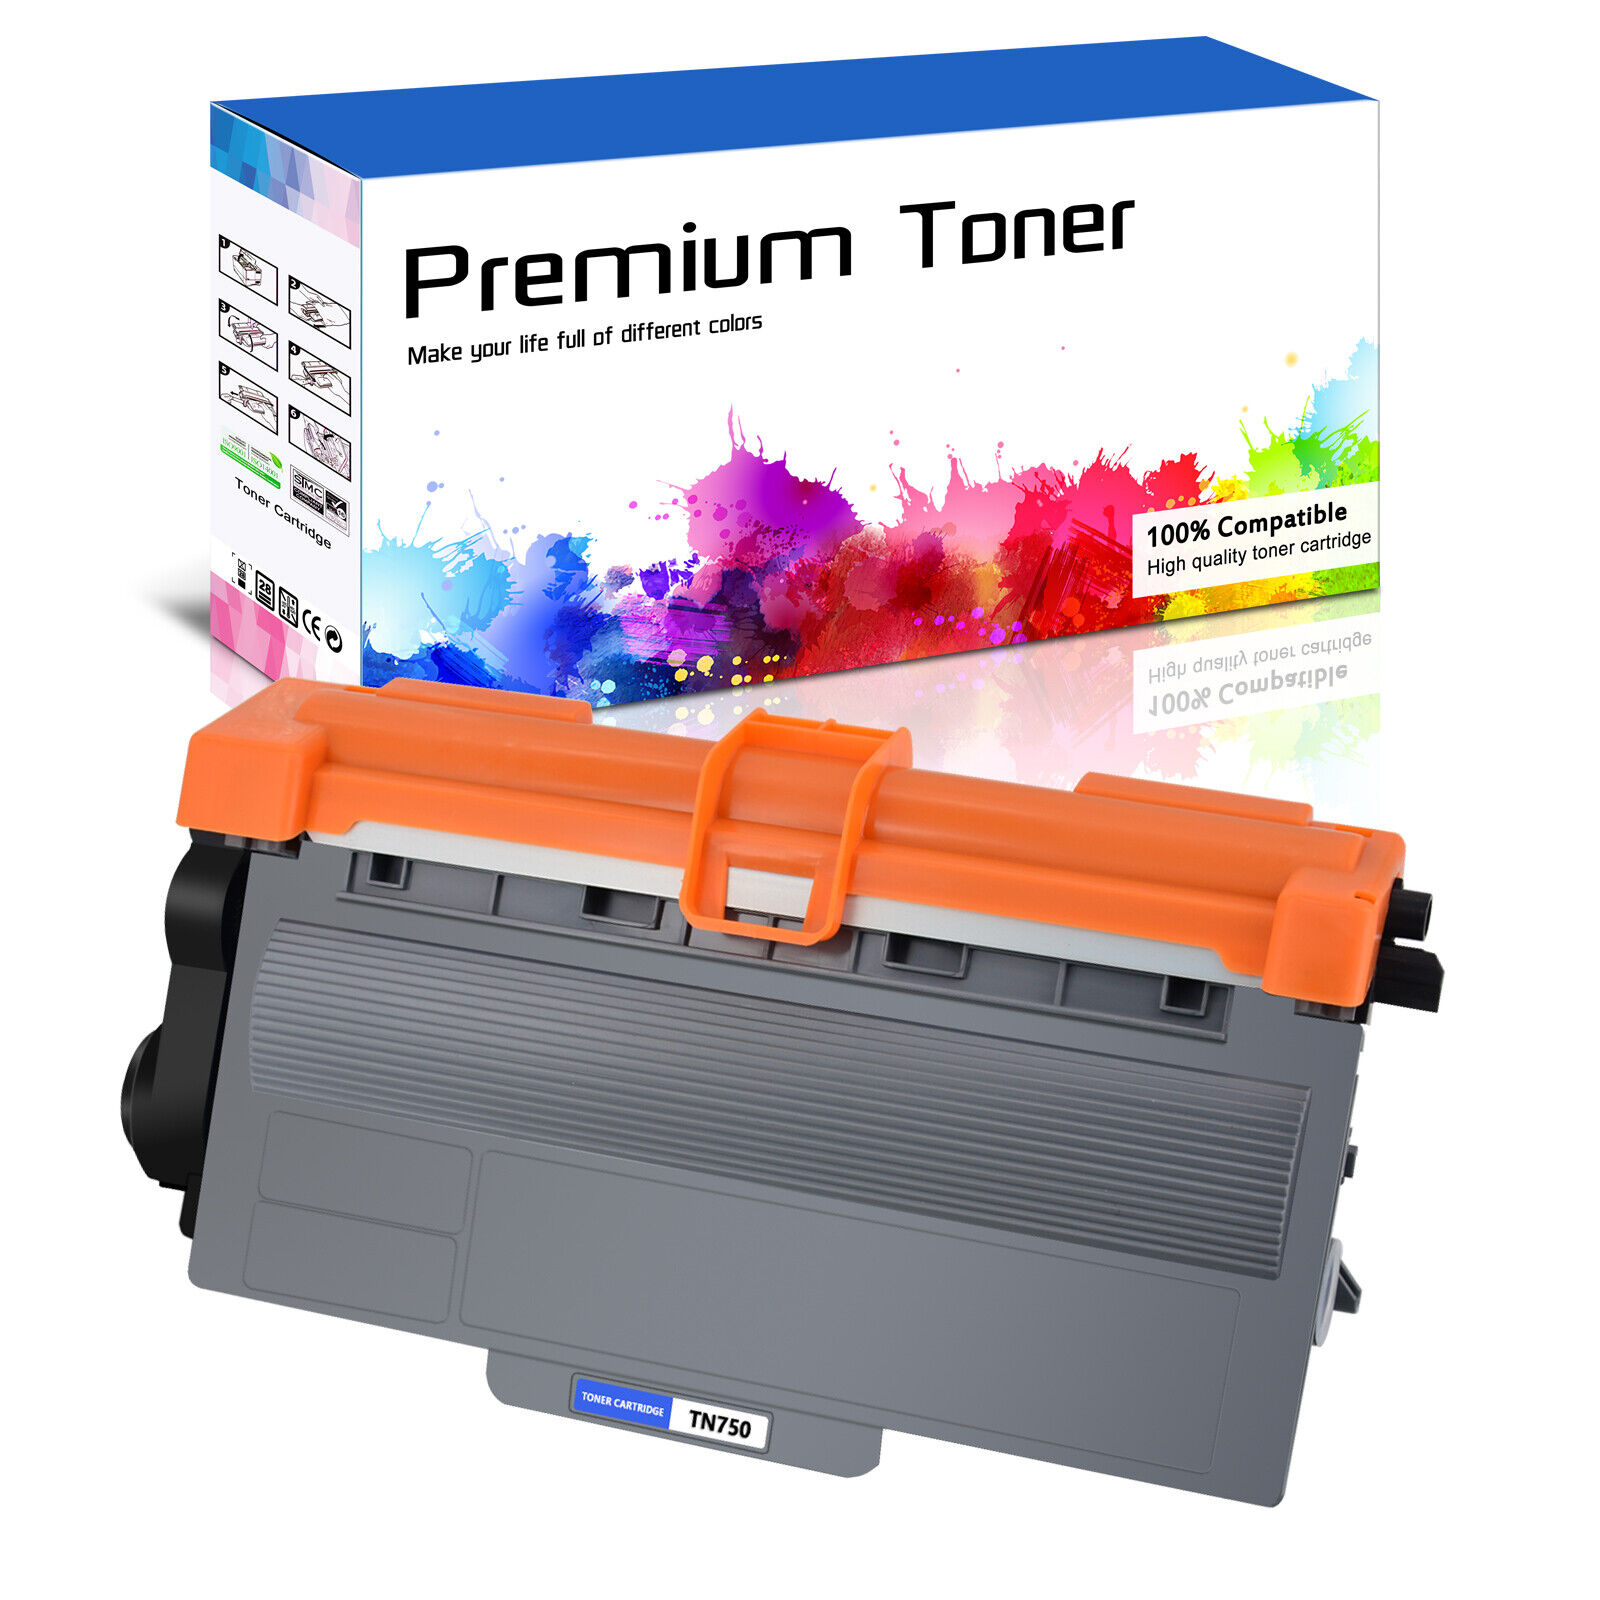 TN750 Toner Cartridge And DR720 Drum for Brother MFC-8950DW HL-5470DW DCP-8150DN